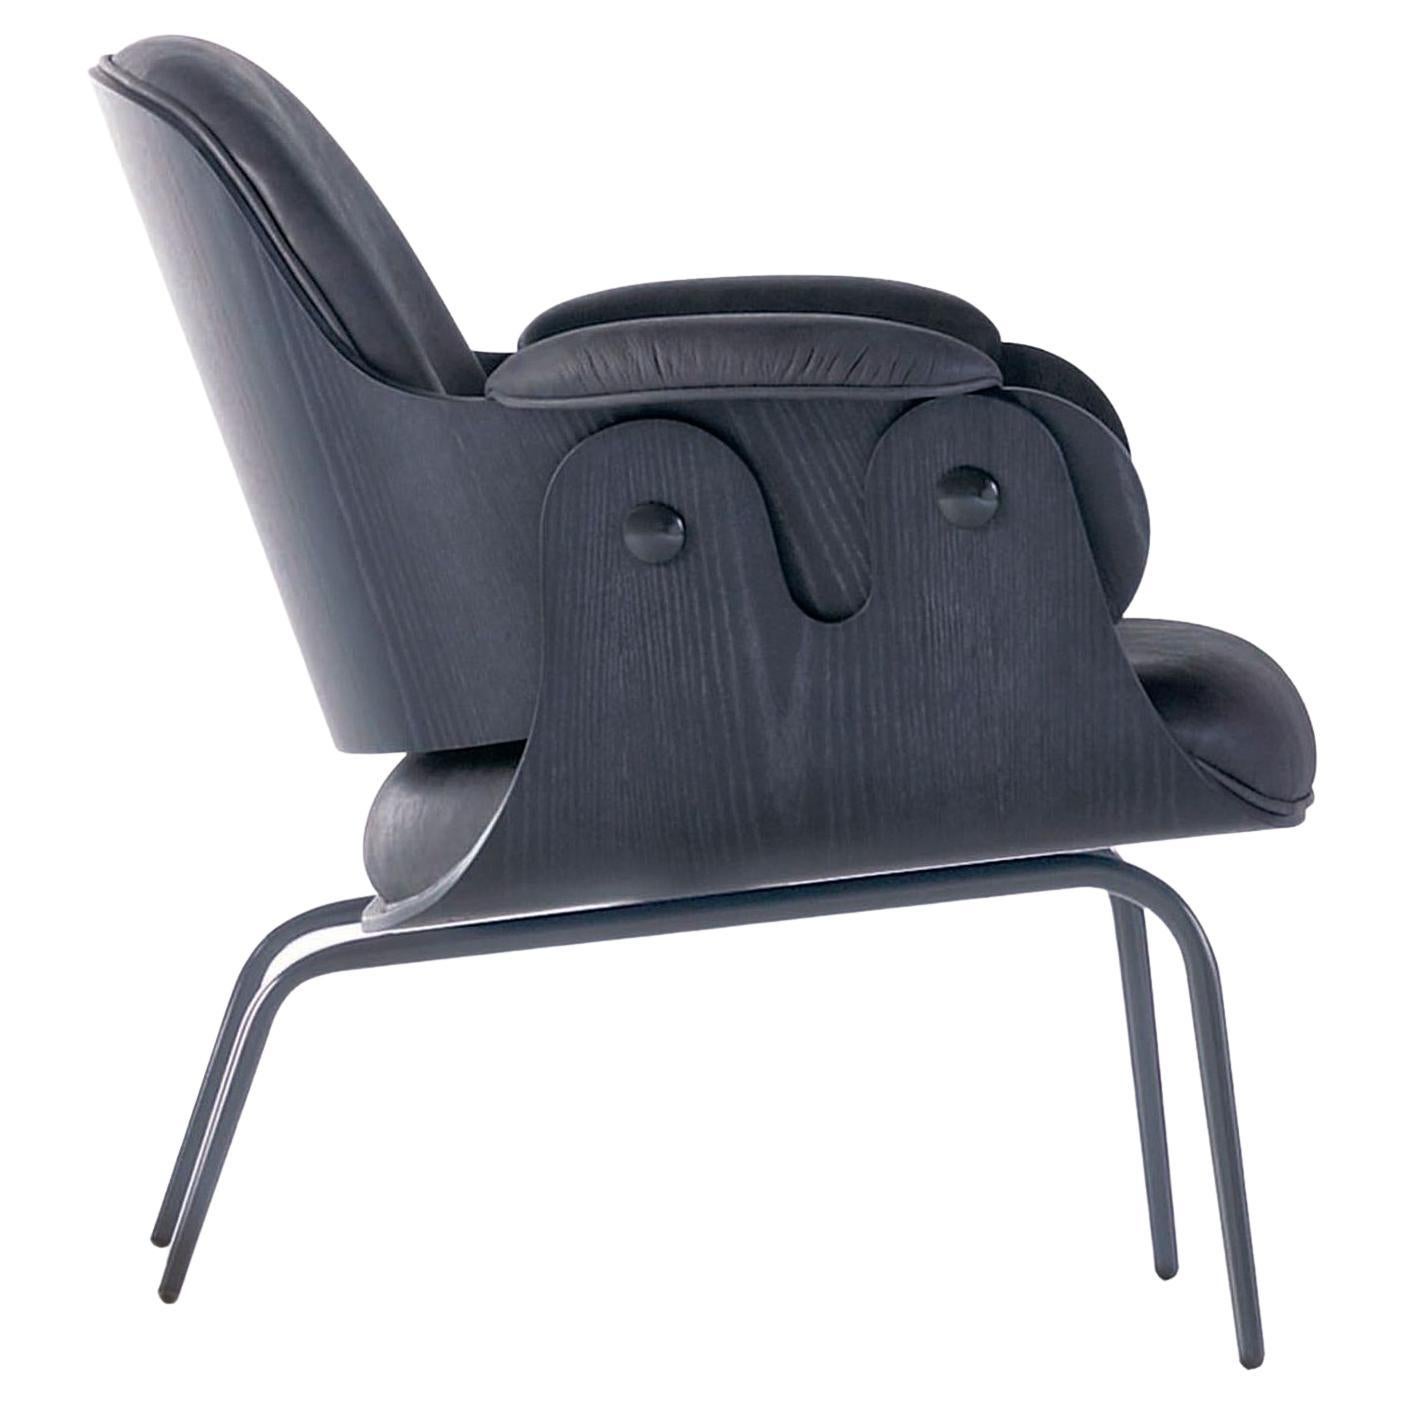 4 Legs Low Lounger Armchair by Jaime Hayon